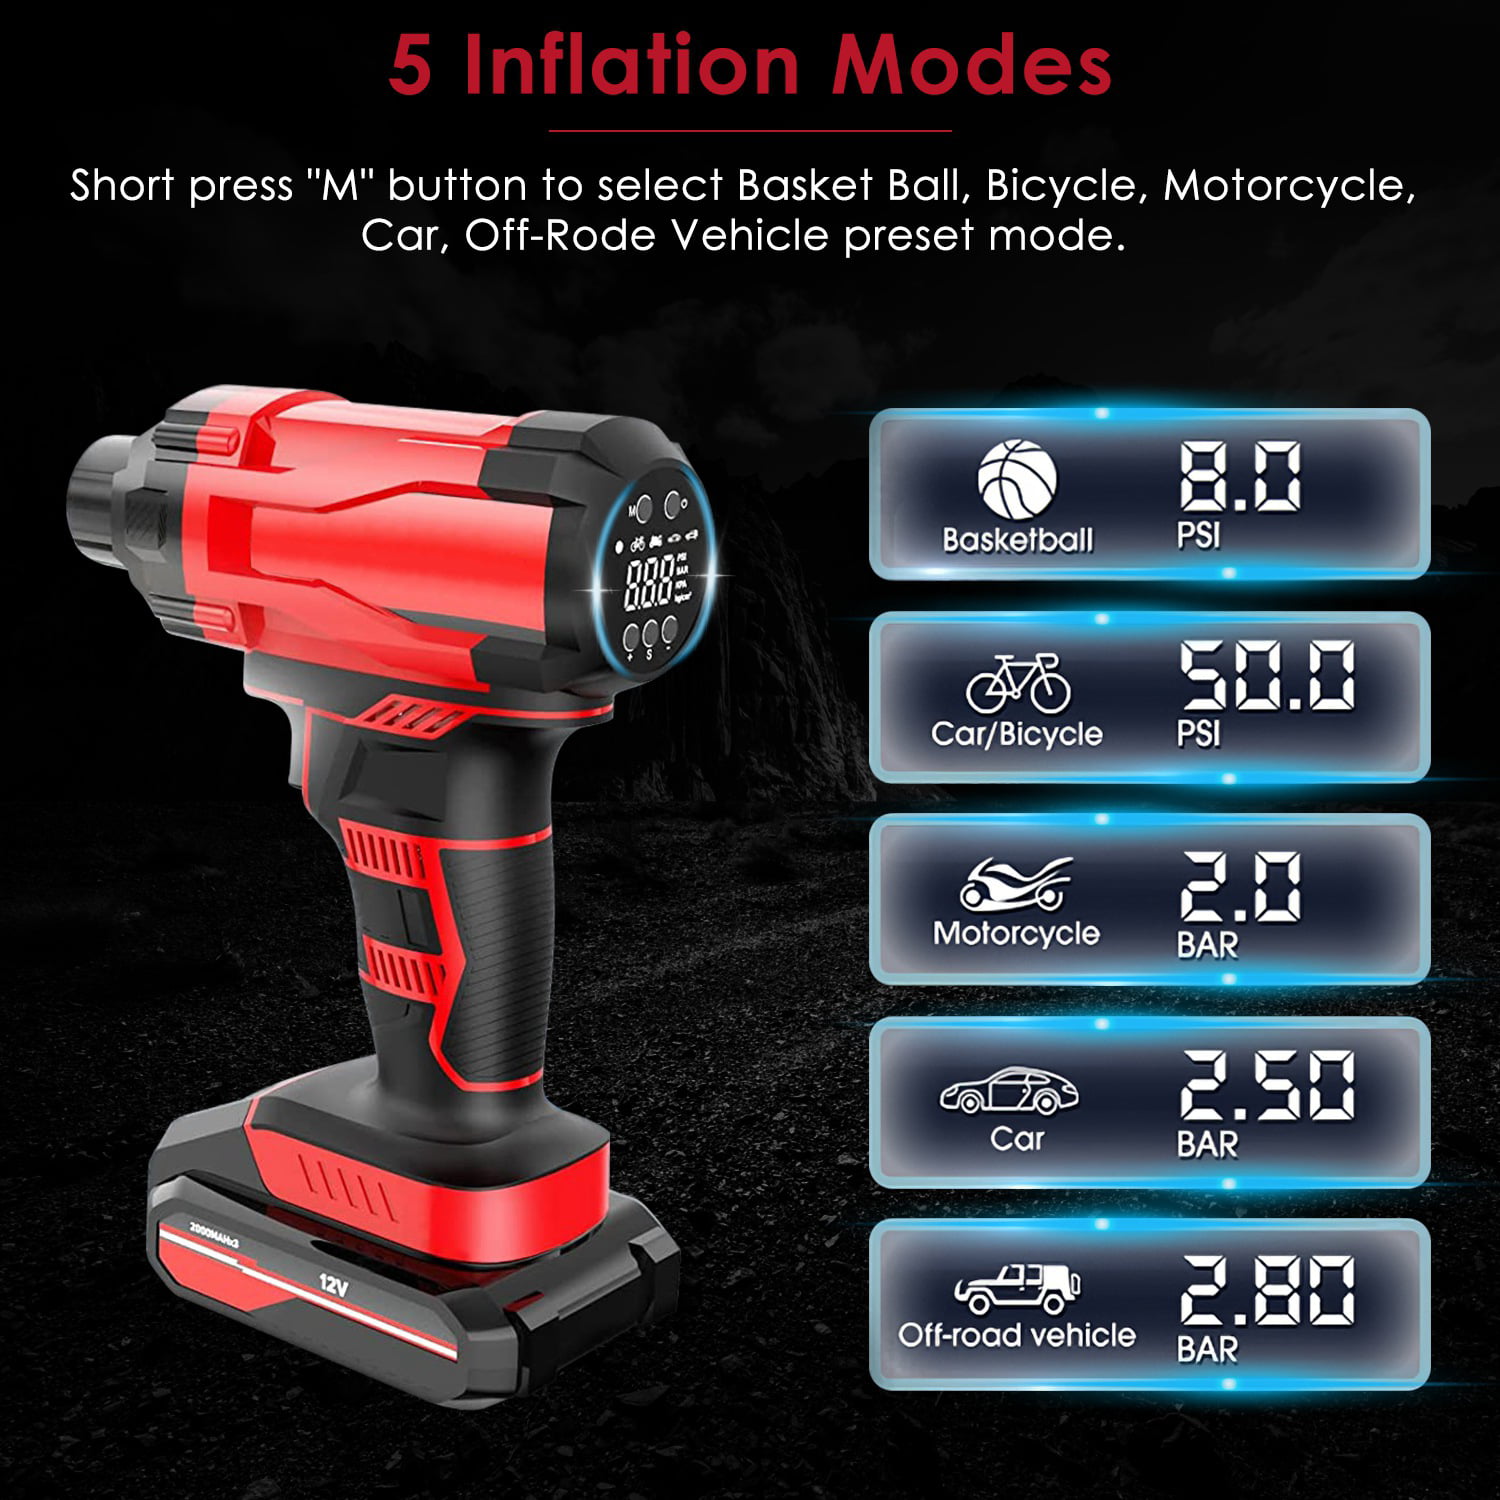 Cordless Air Compressor Pump， Tire Inflator，Rechargeable 2200mAH Battery，With  Digital LCD LED Light，Portable Hand Held Air Pump for Car, RV,  BicycleTruck, Ball, Motor and Other Inflatables